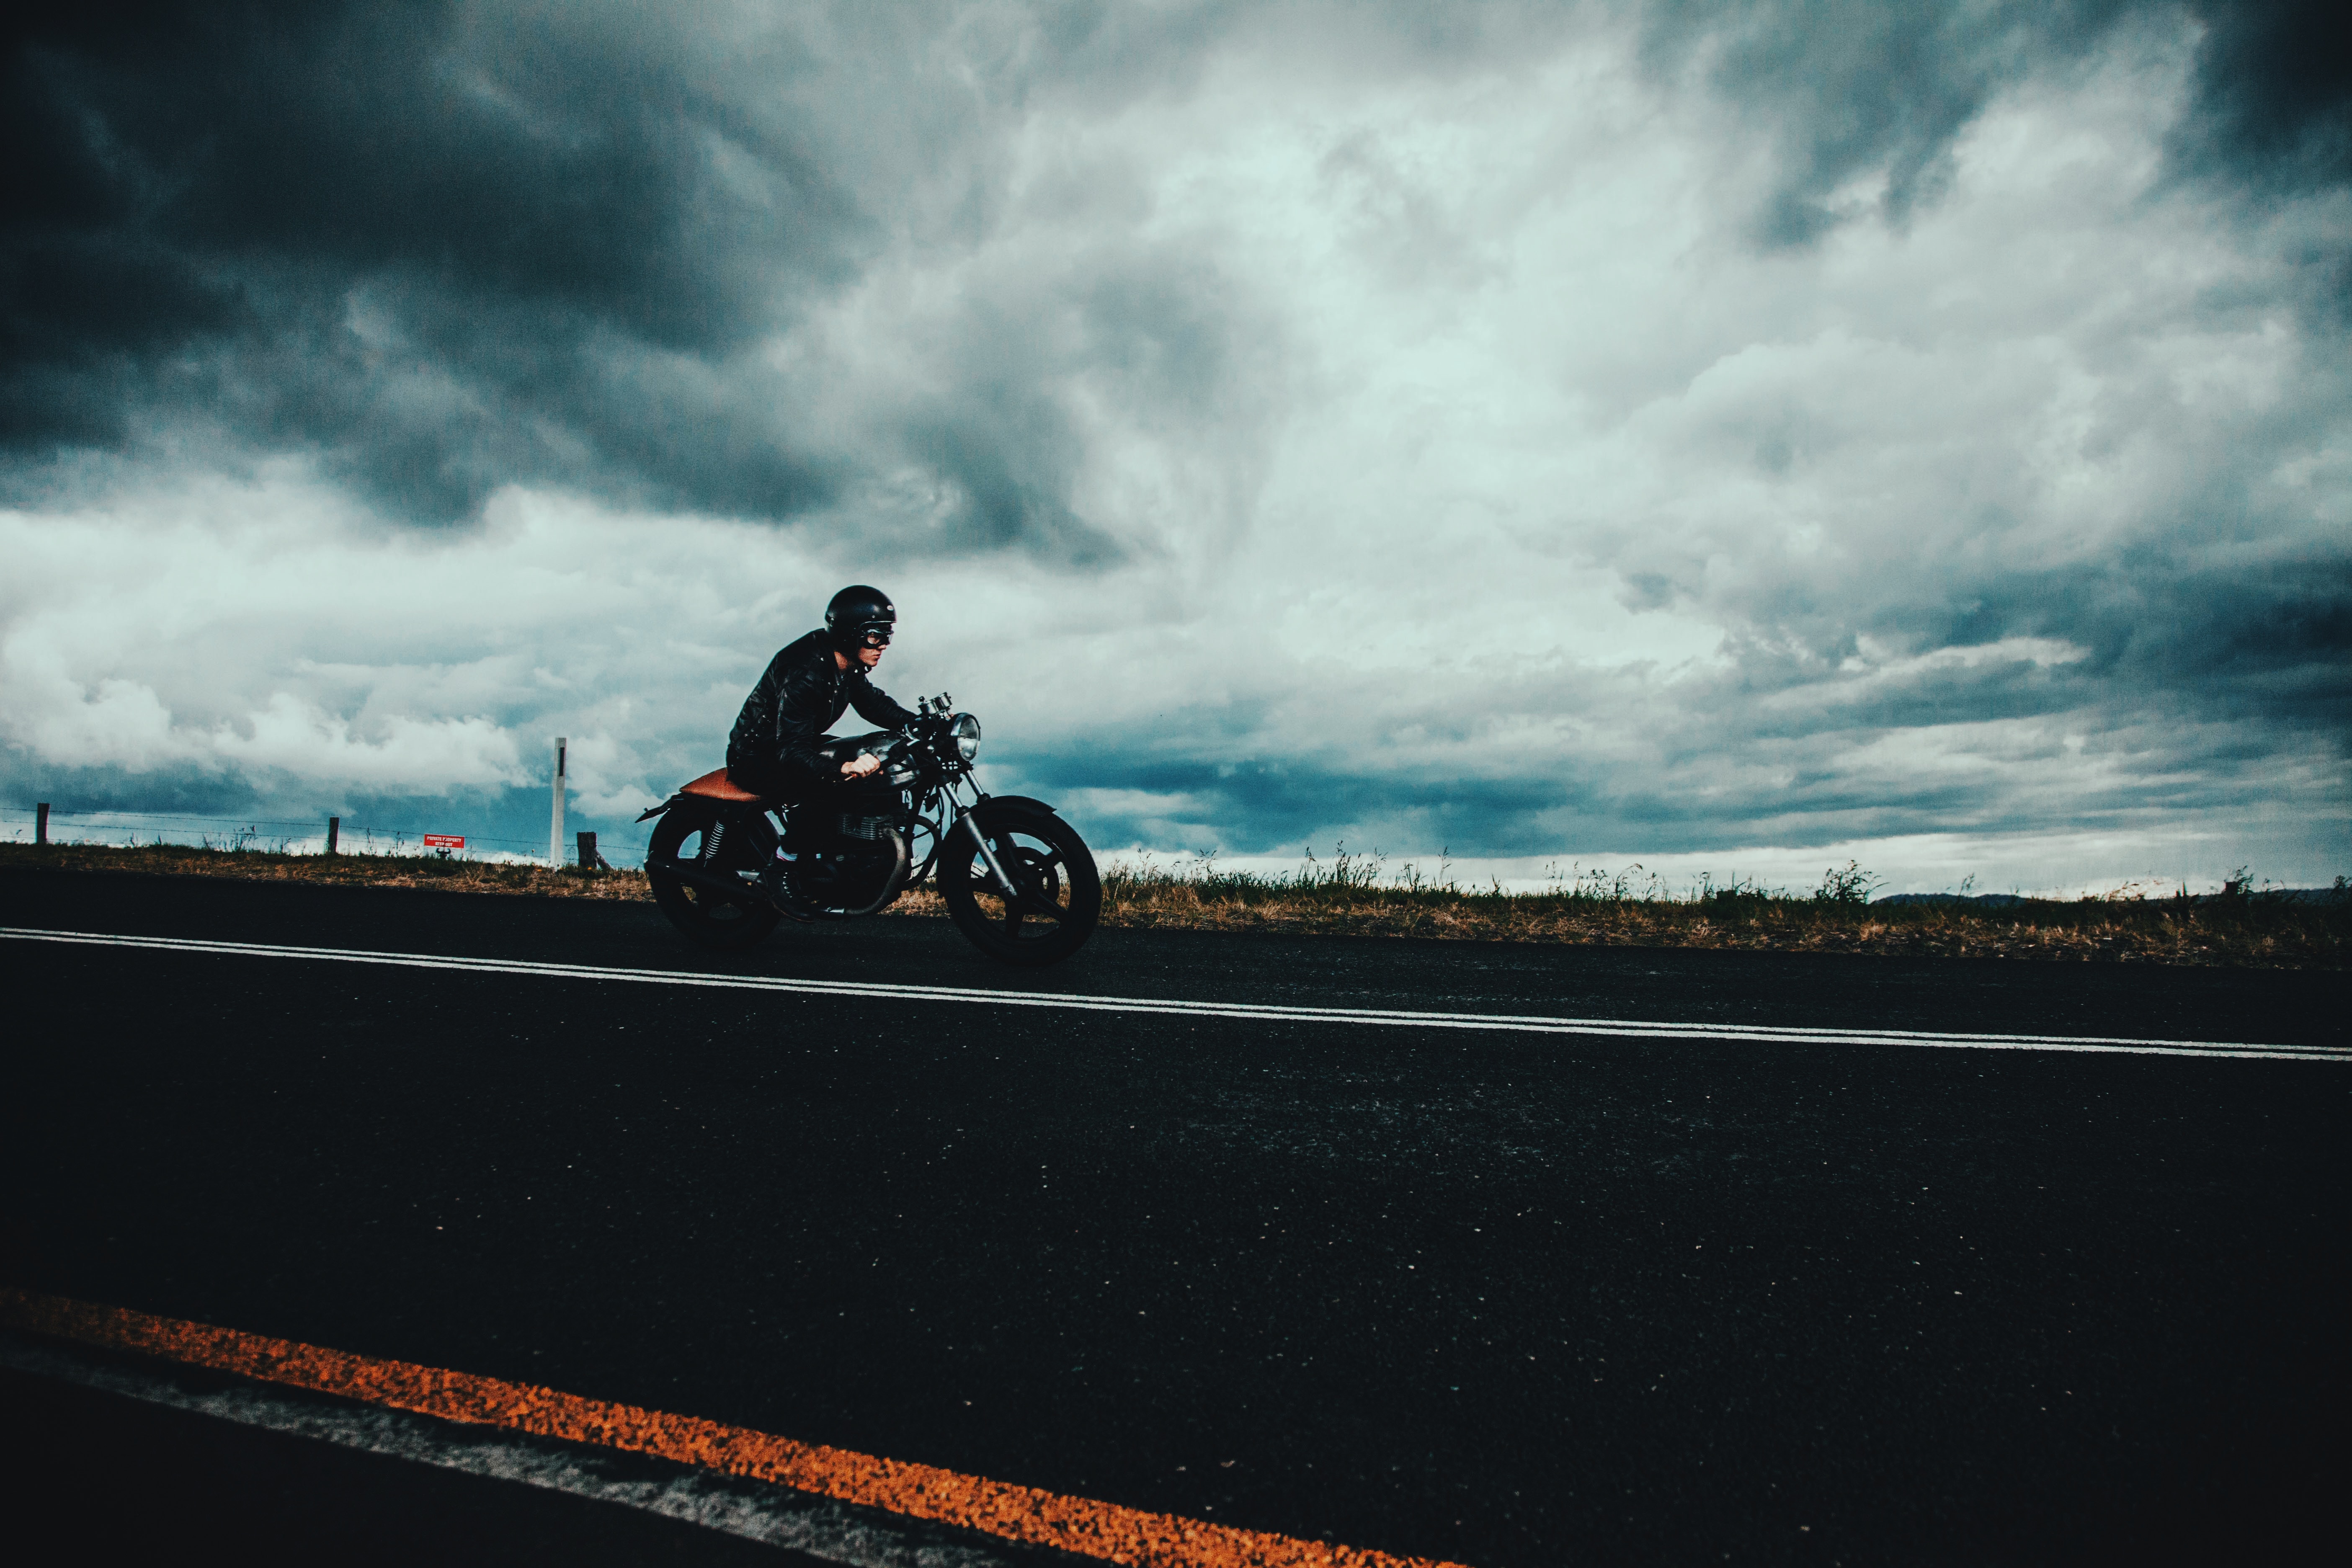 motorcyclist, clouds, motorcycles, road, markup, asphalt, helmet, mainly cloudy, overcast